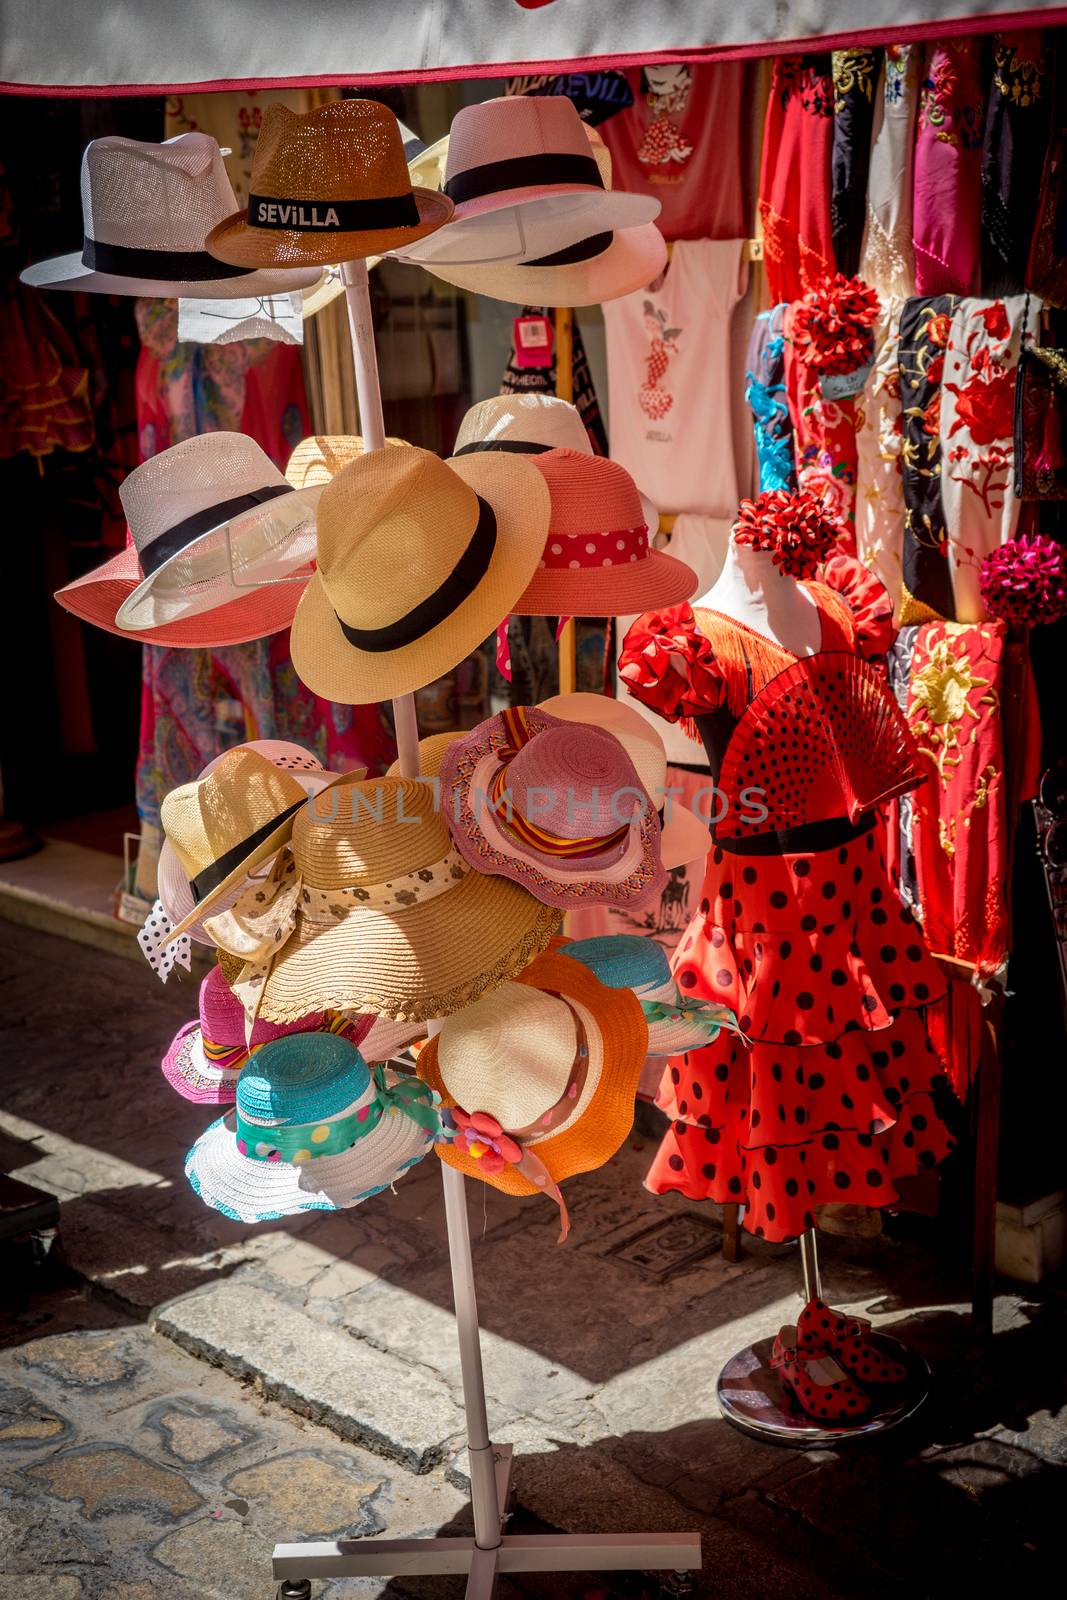 Caps and flamenco dress for sale in a shop in Seville, Spain, Europe